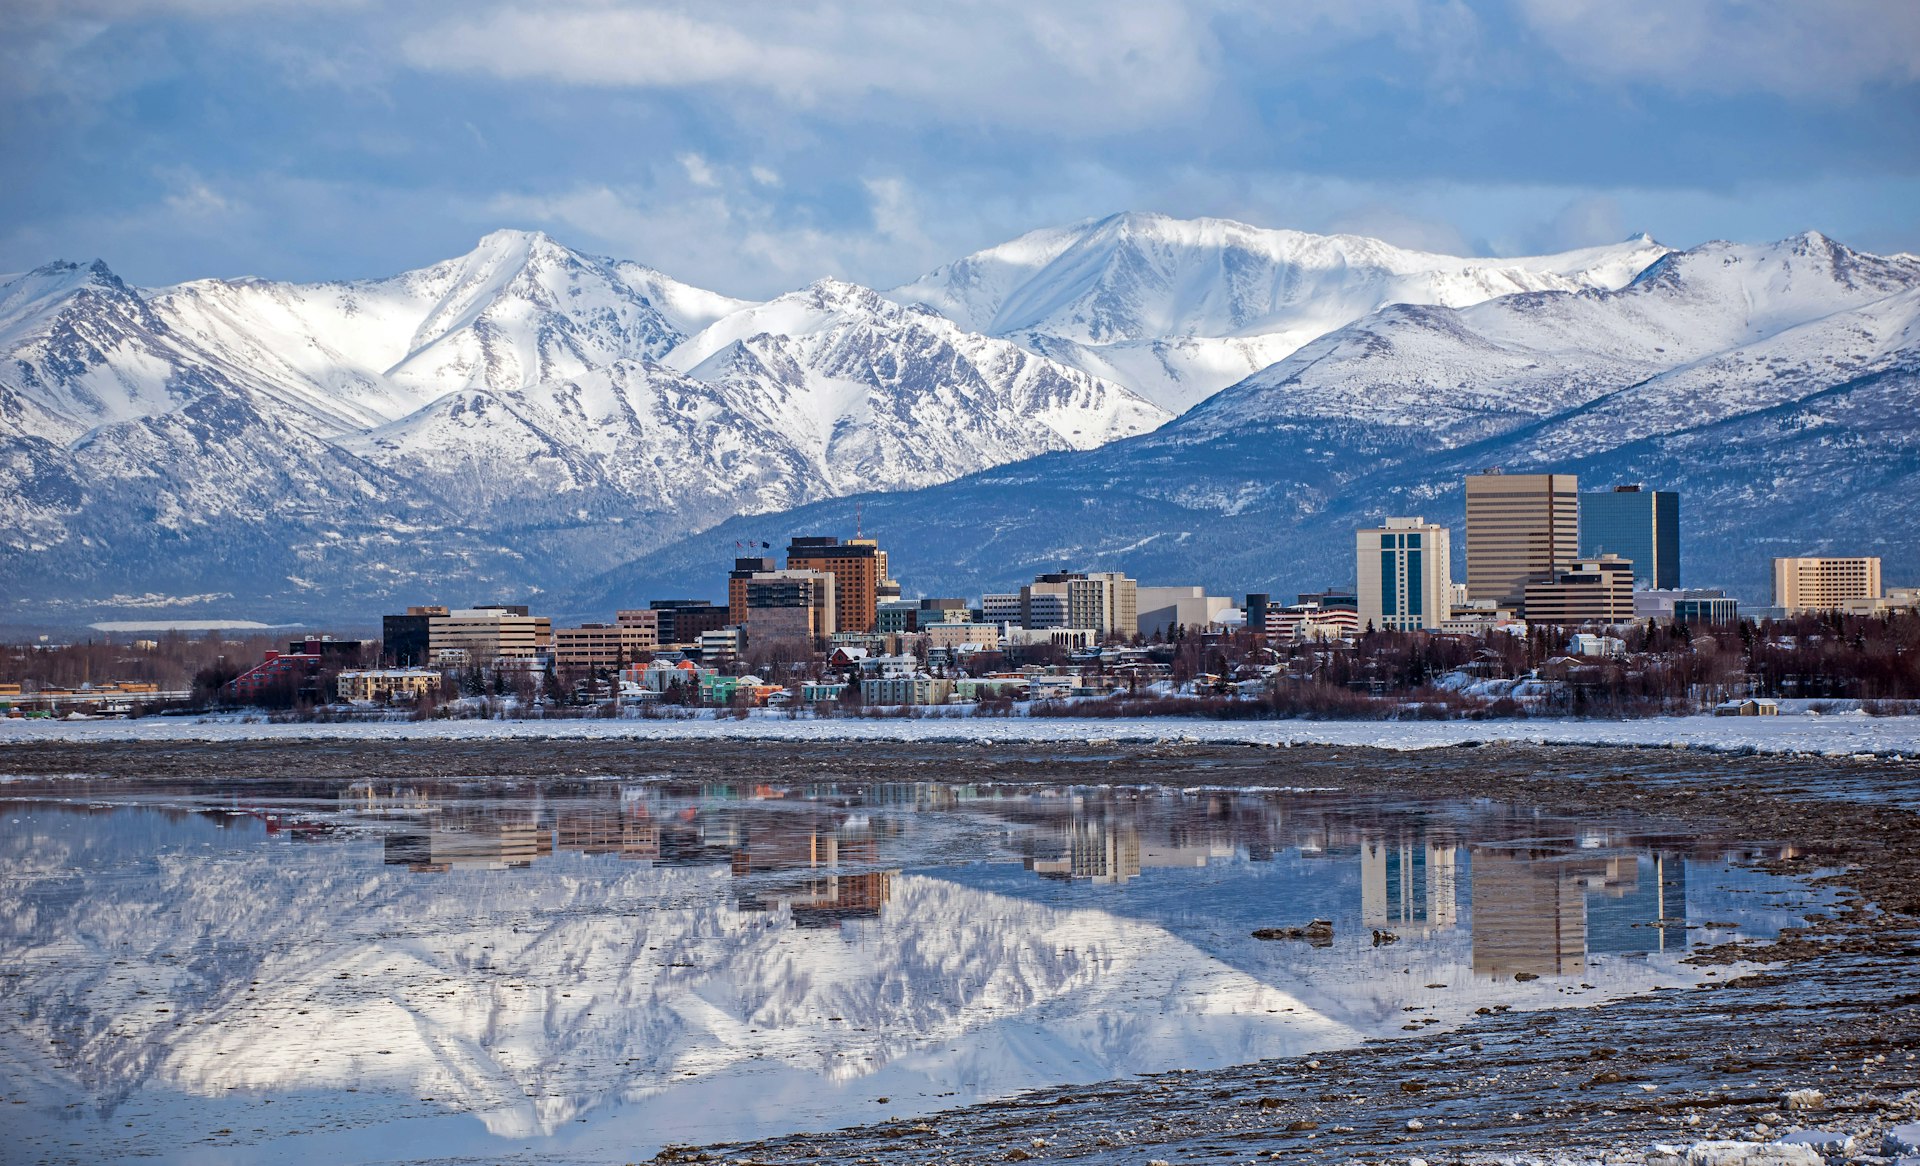 The Anchorage skyline with a winter reflection